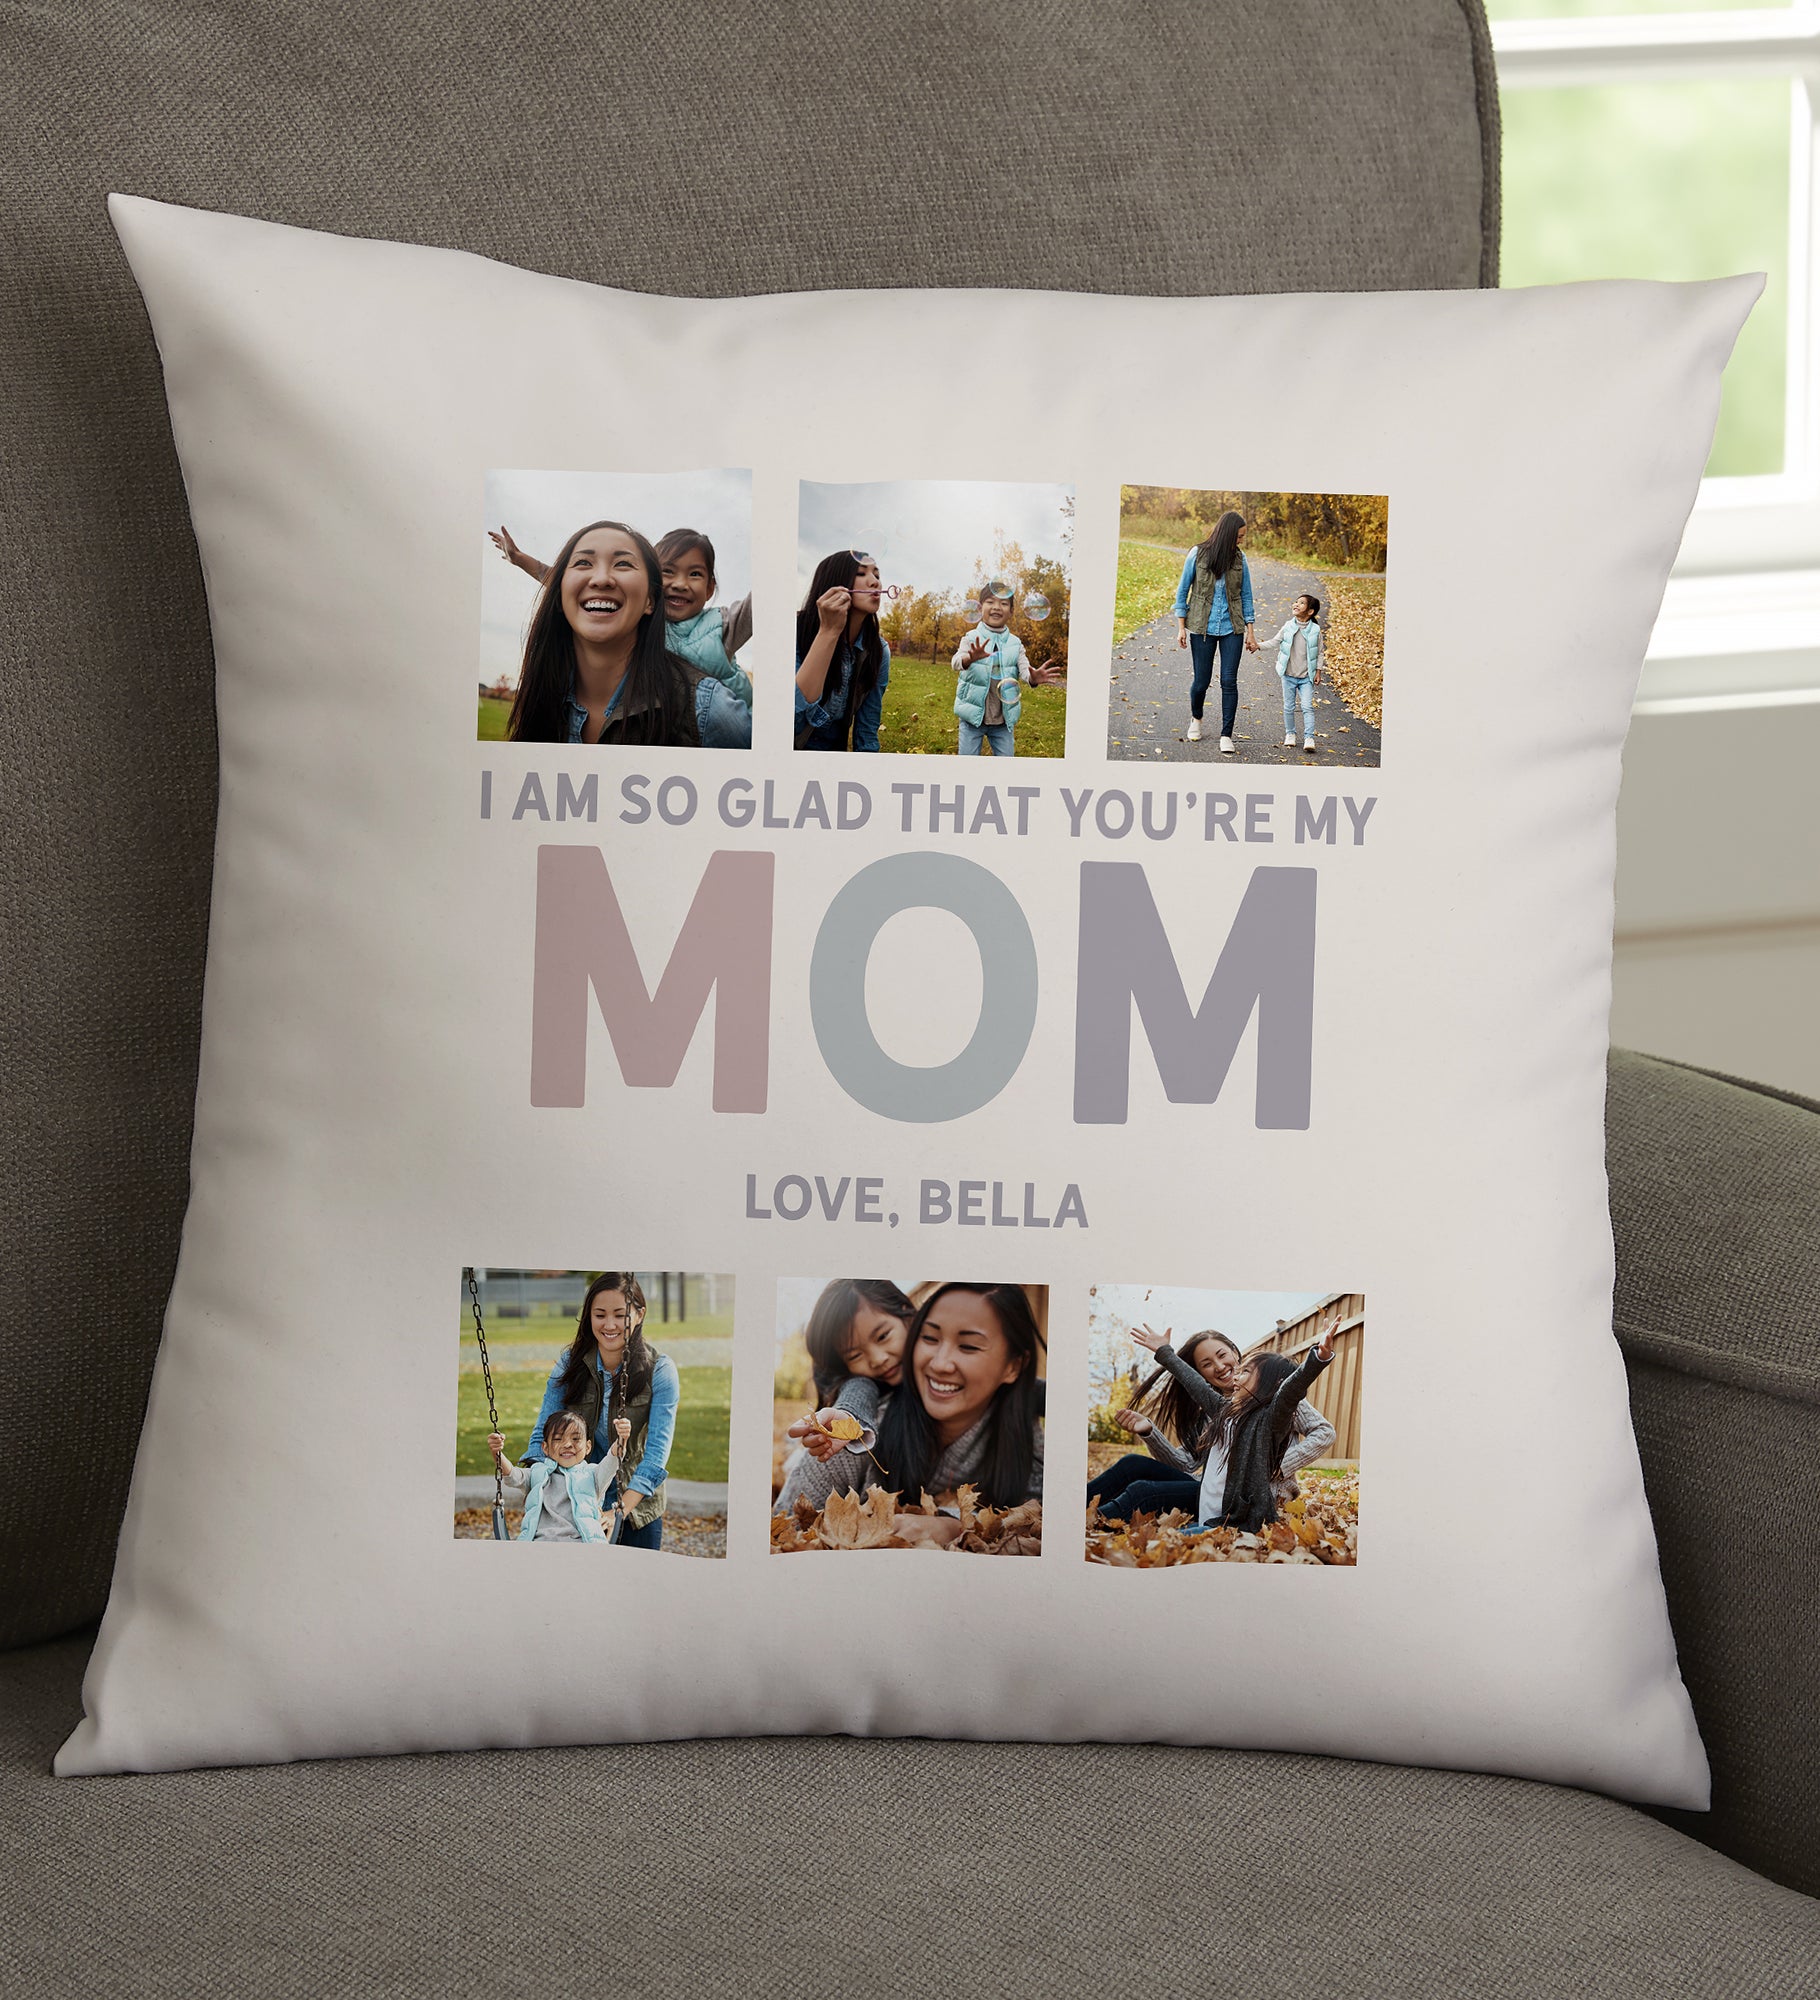 Glad You're Our Mom Personalized Photo Throw Pillow